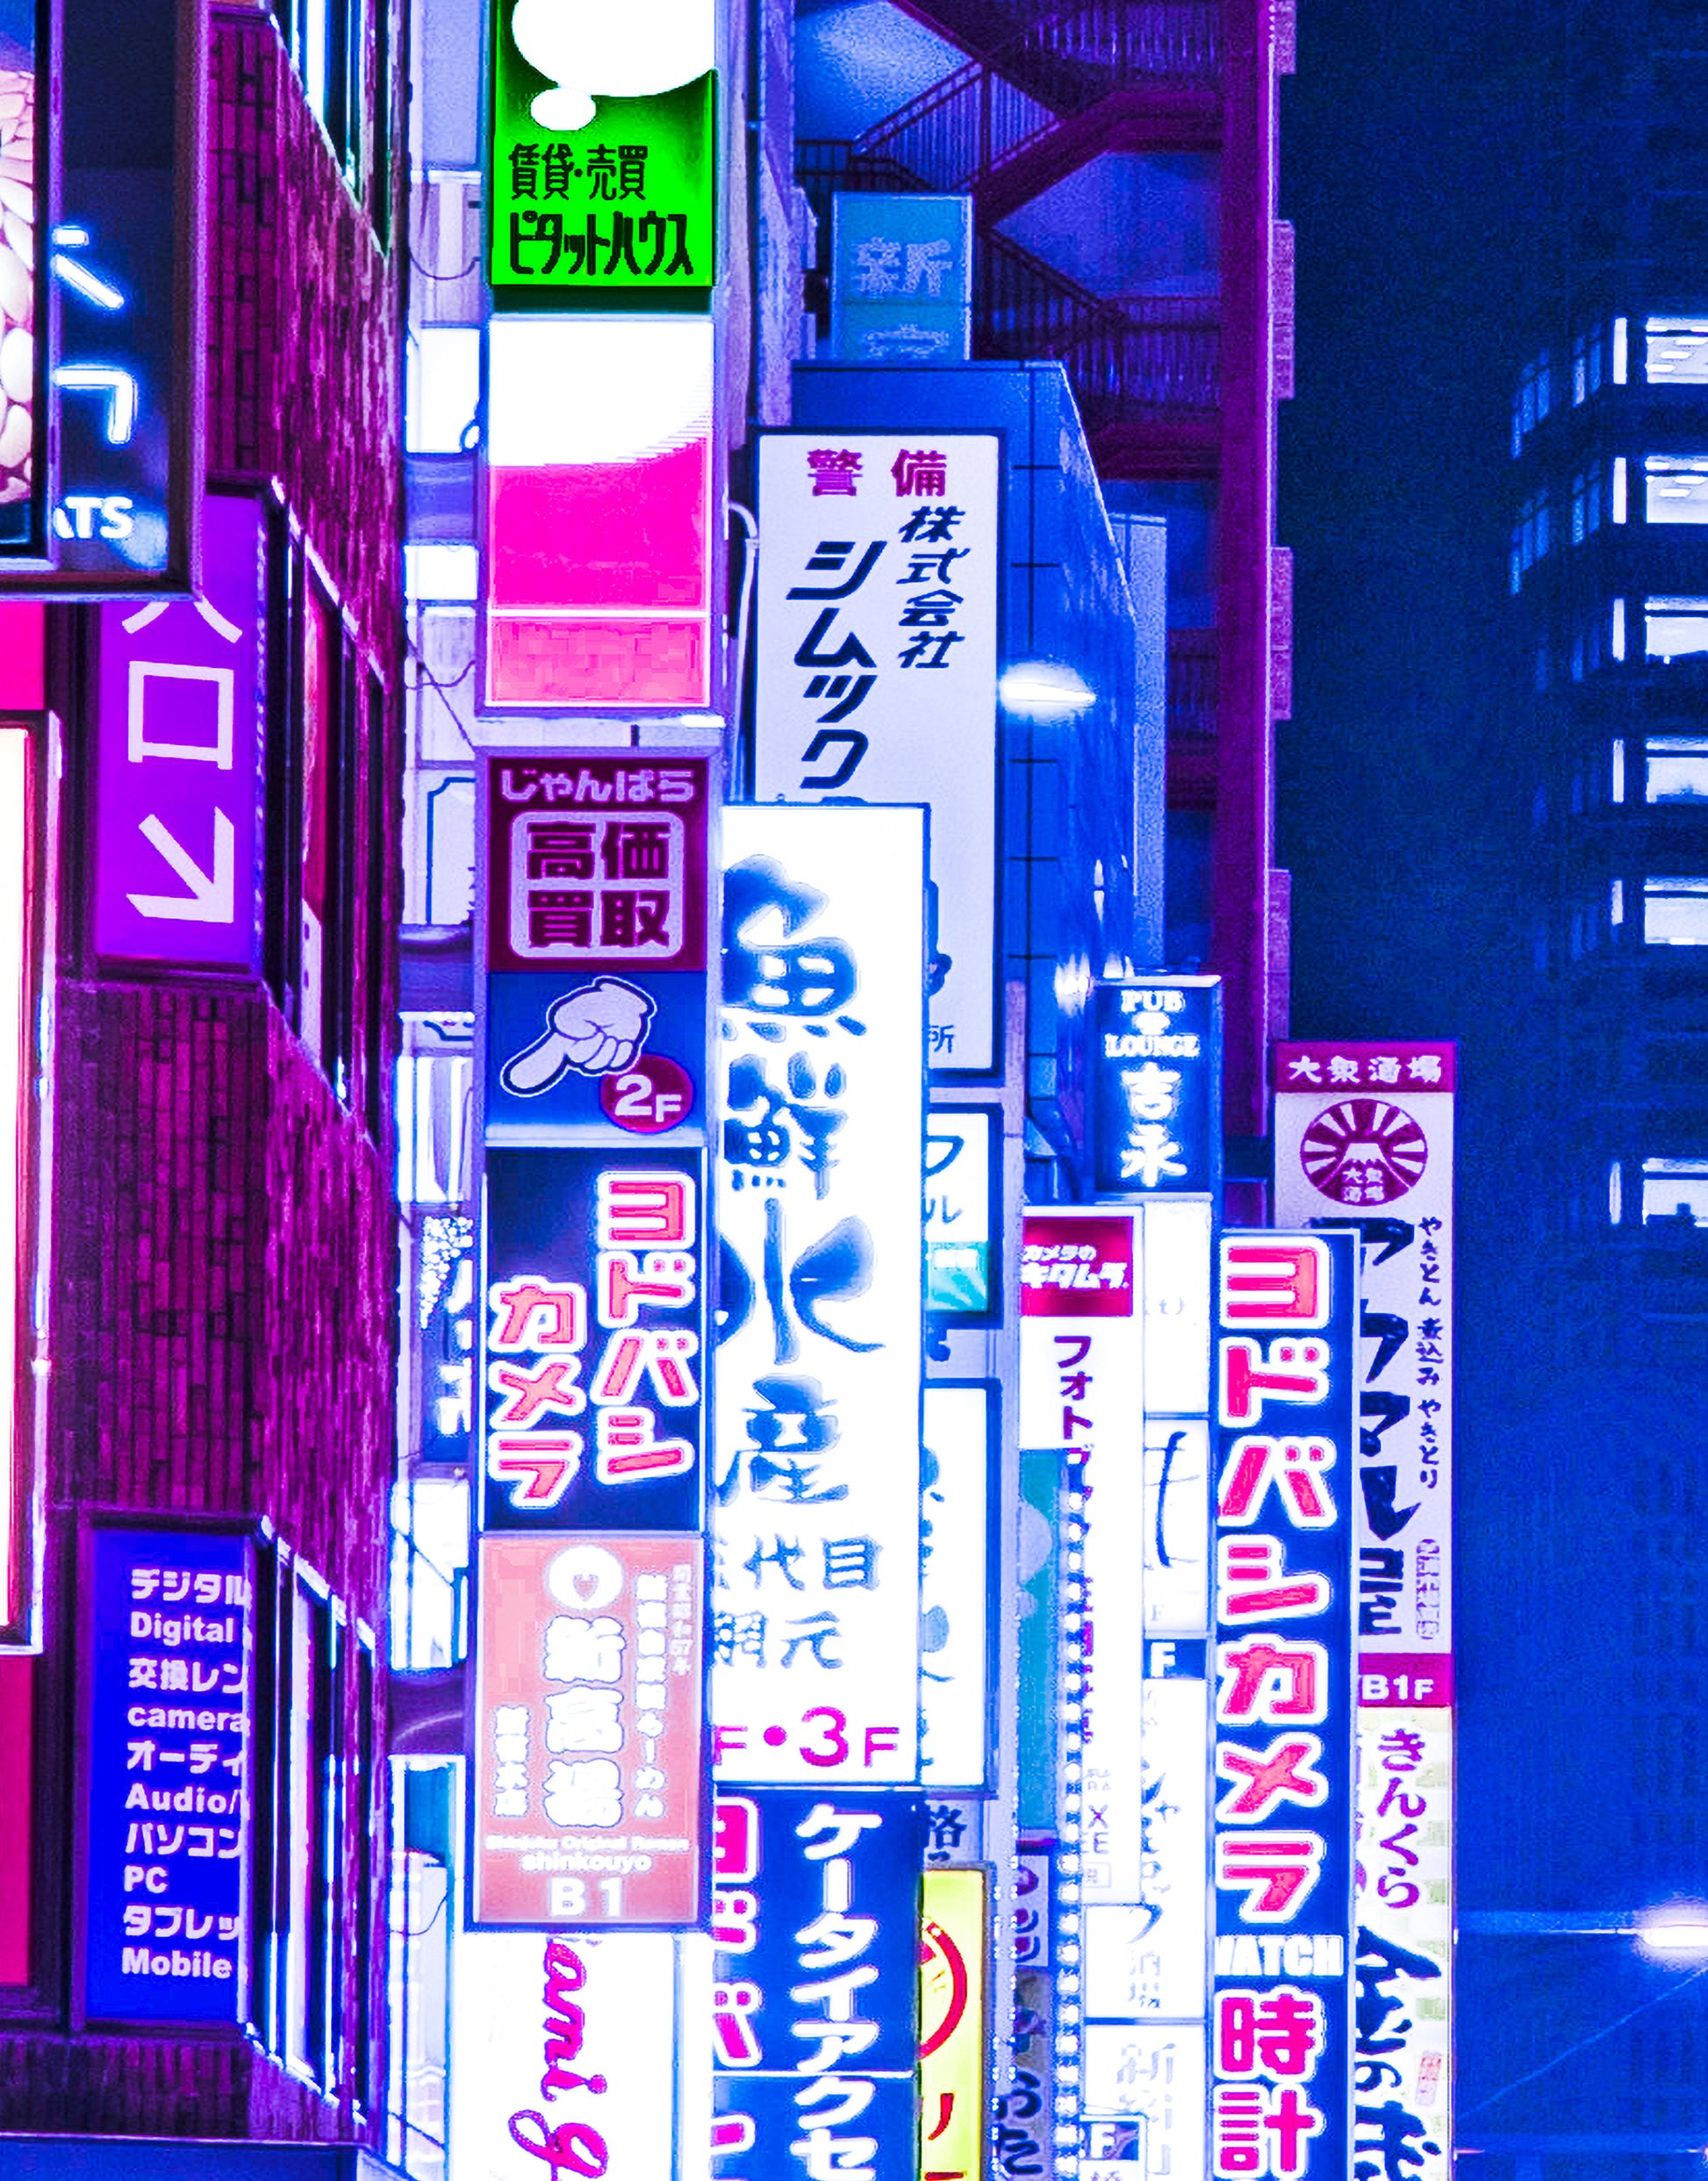 Aesthetic Japan City Wallpapers